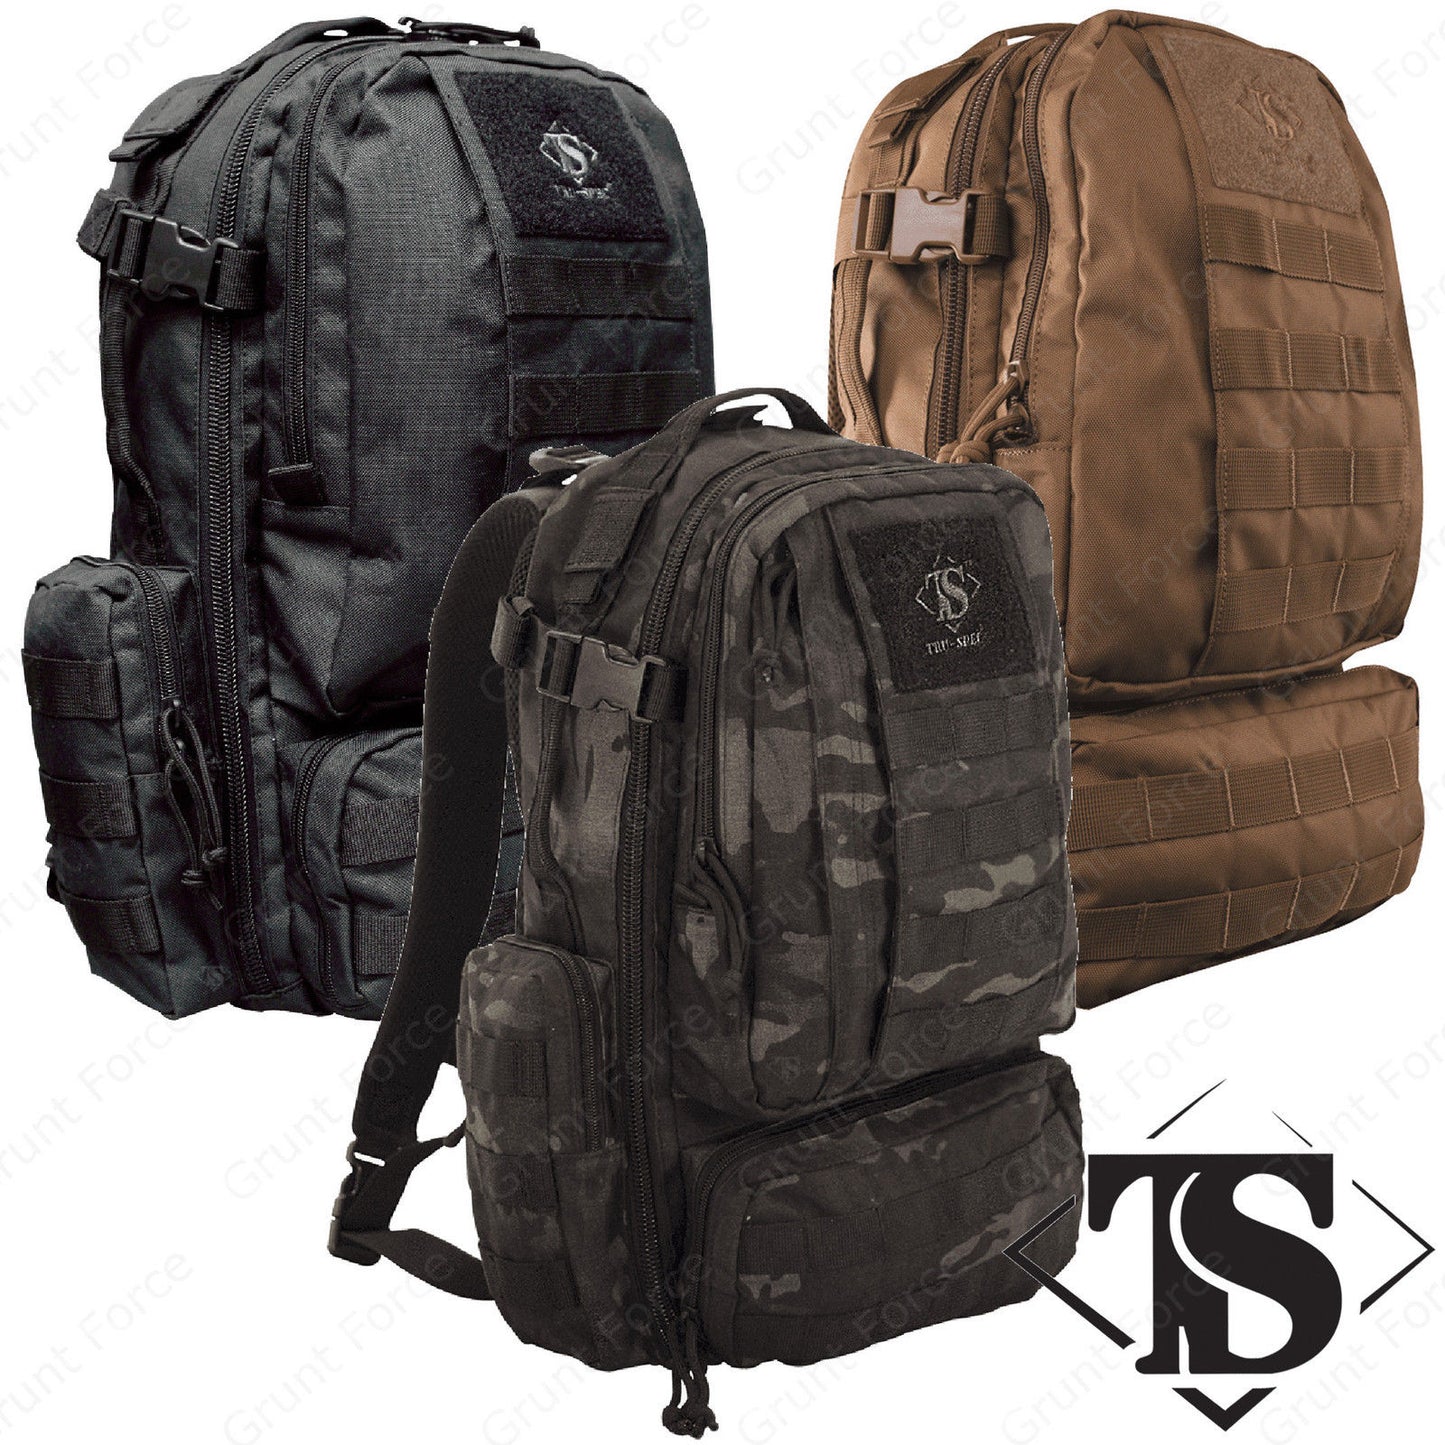 Tru-Spec Circadian Backpack - Everyday Tactical Backpack With CCW Access